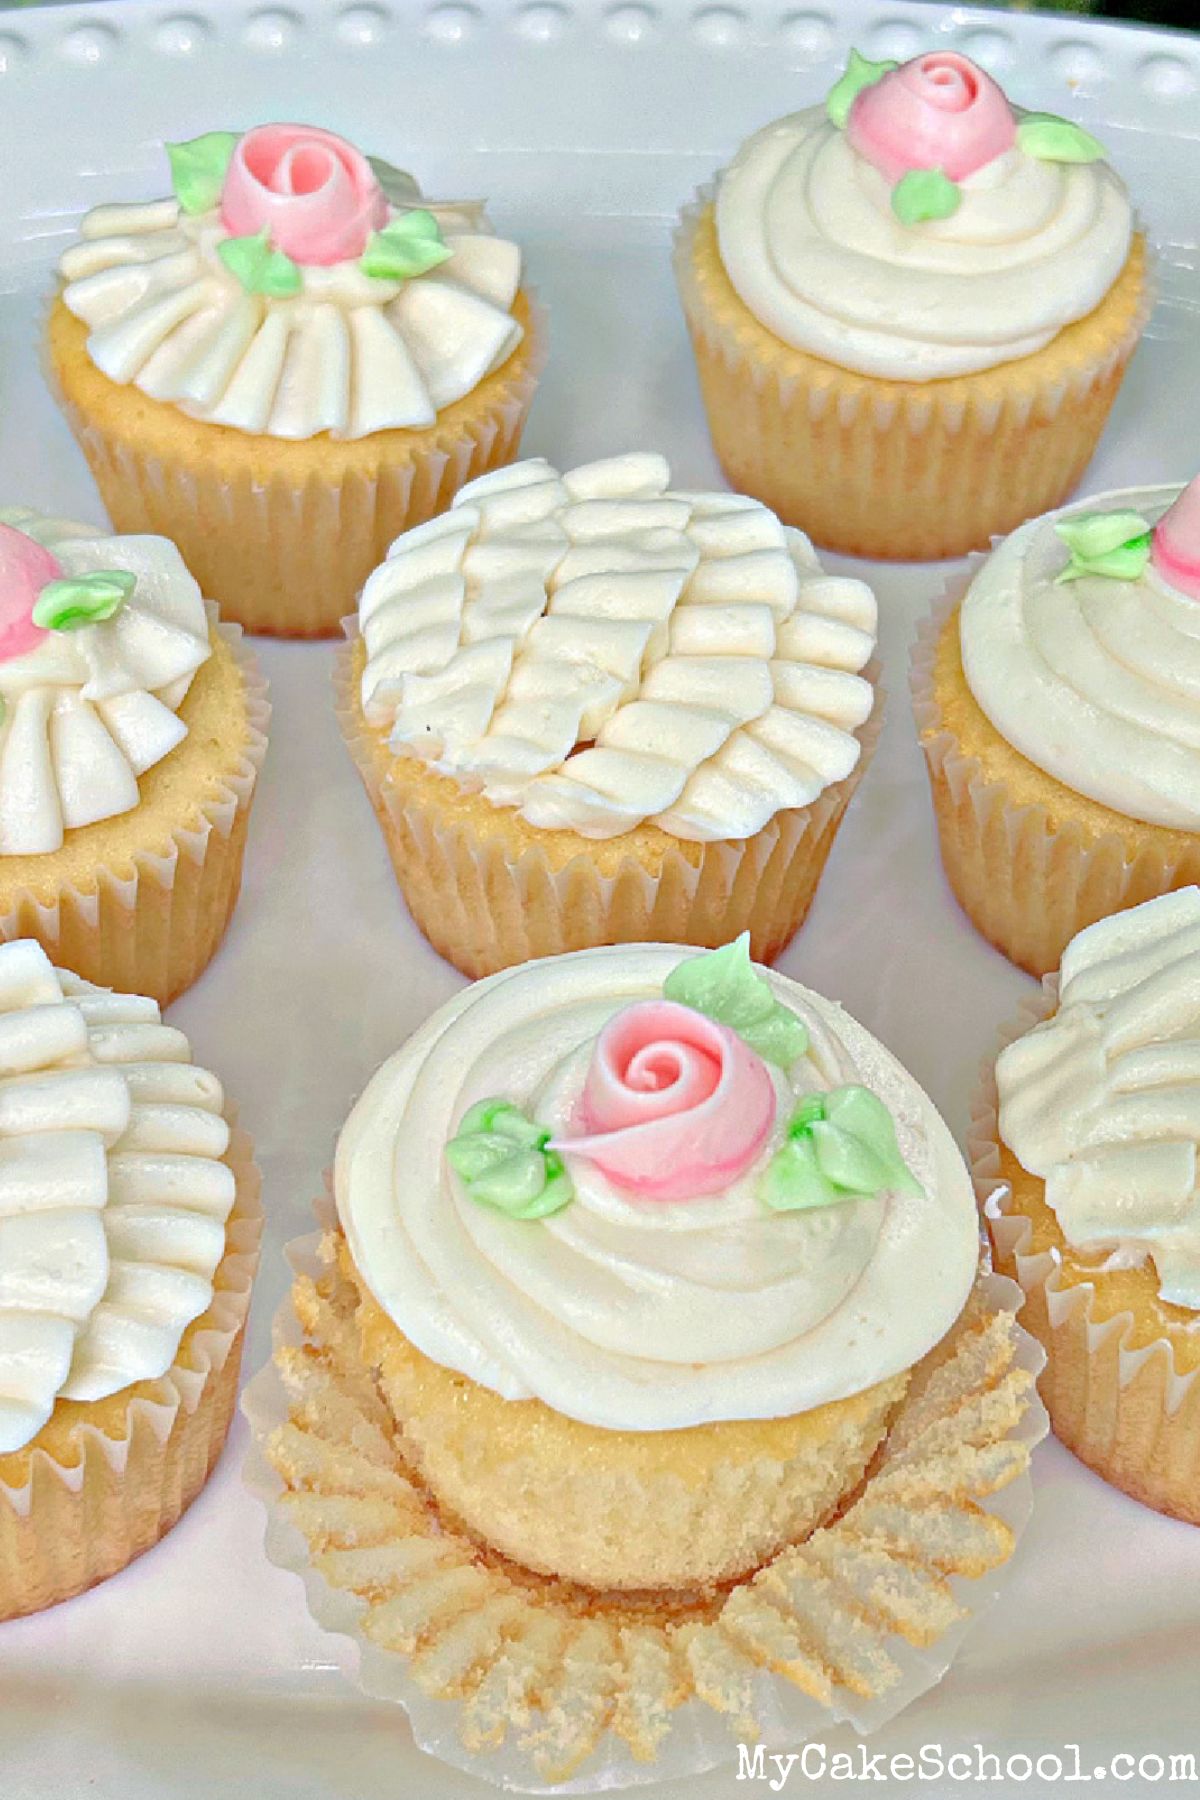 Platter of scratch vanilla cupcakes, decorated with buttercream ruffles and roses, on a pedestal.